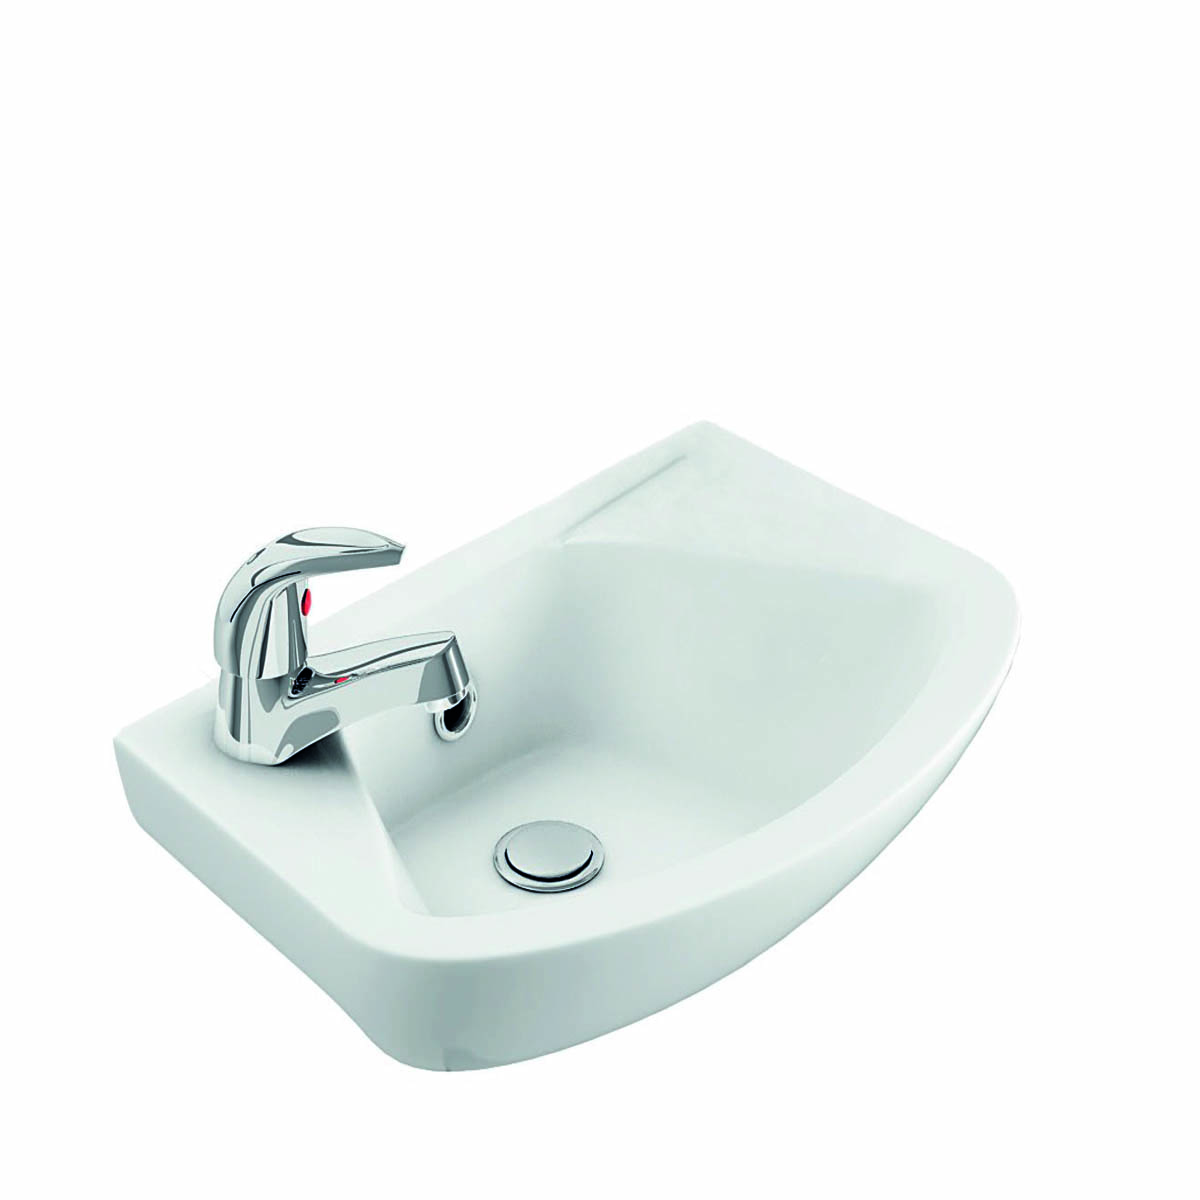 Arley 1 Tap Hole 360mm Wall Basin In A Box (Including Brackets)